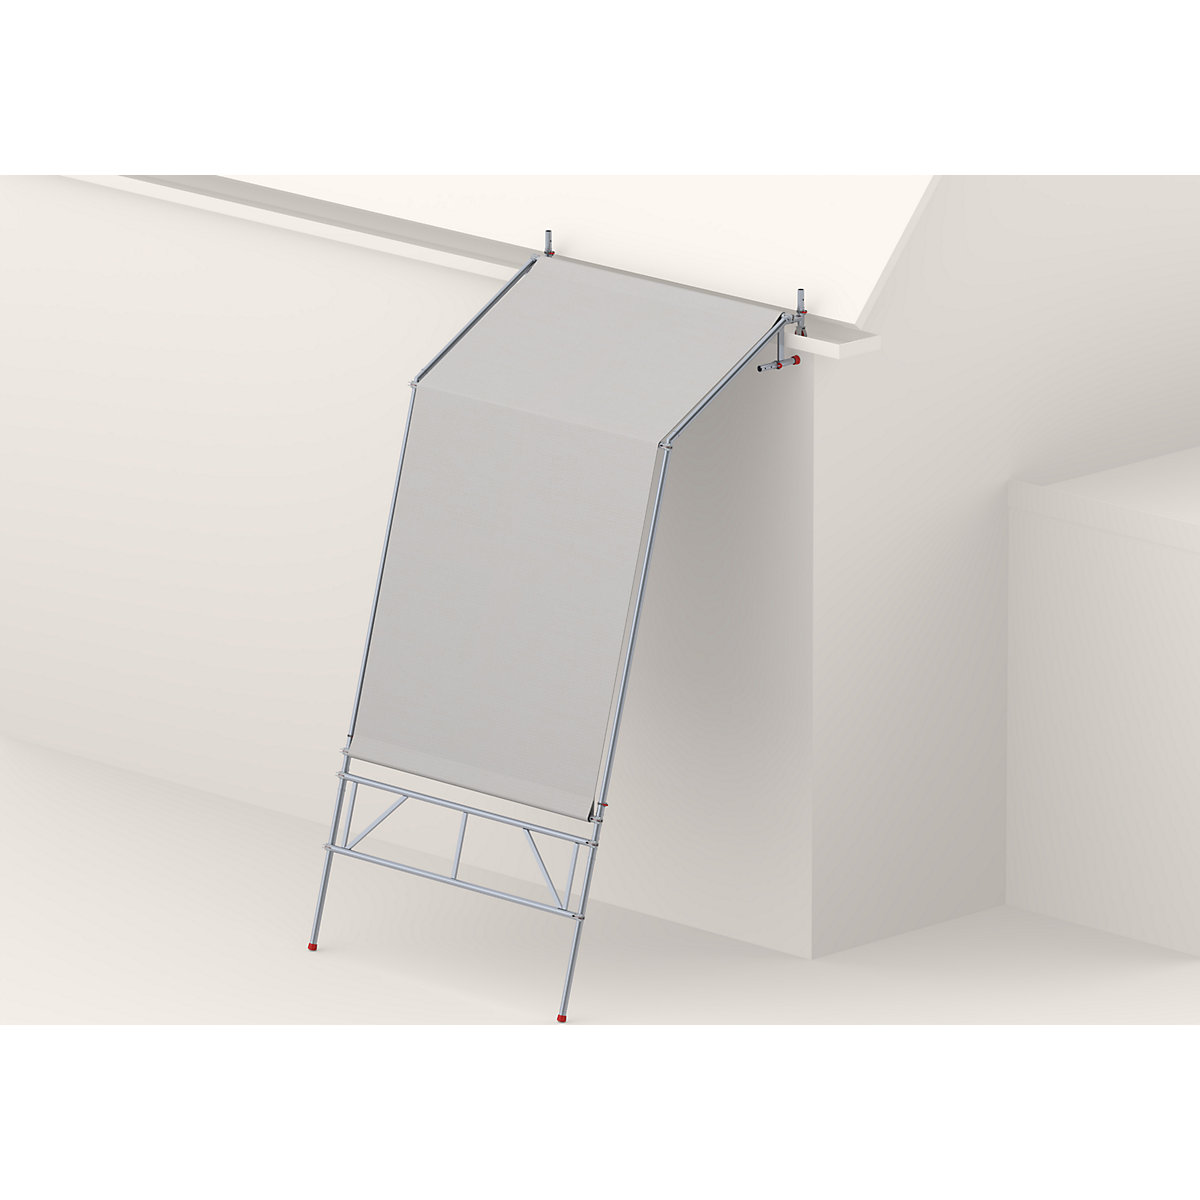 Weather protection tent for scaffolding - Altrex